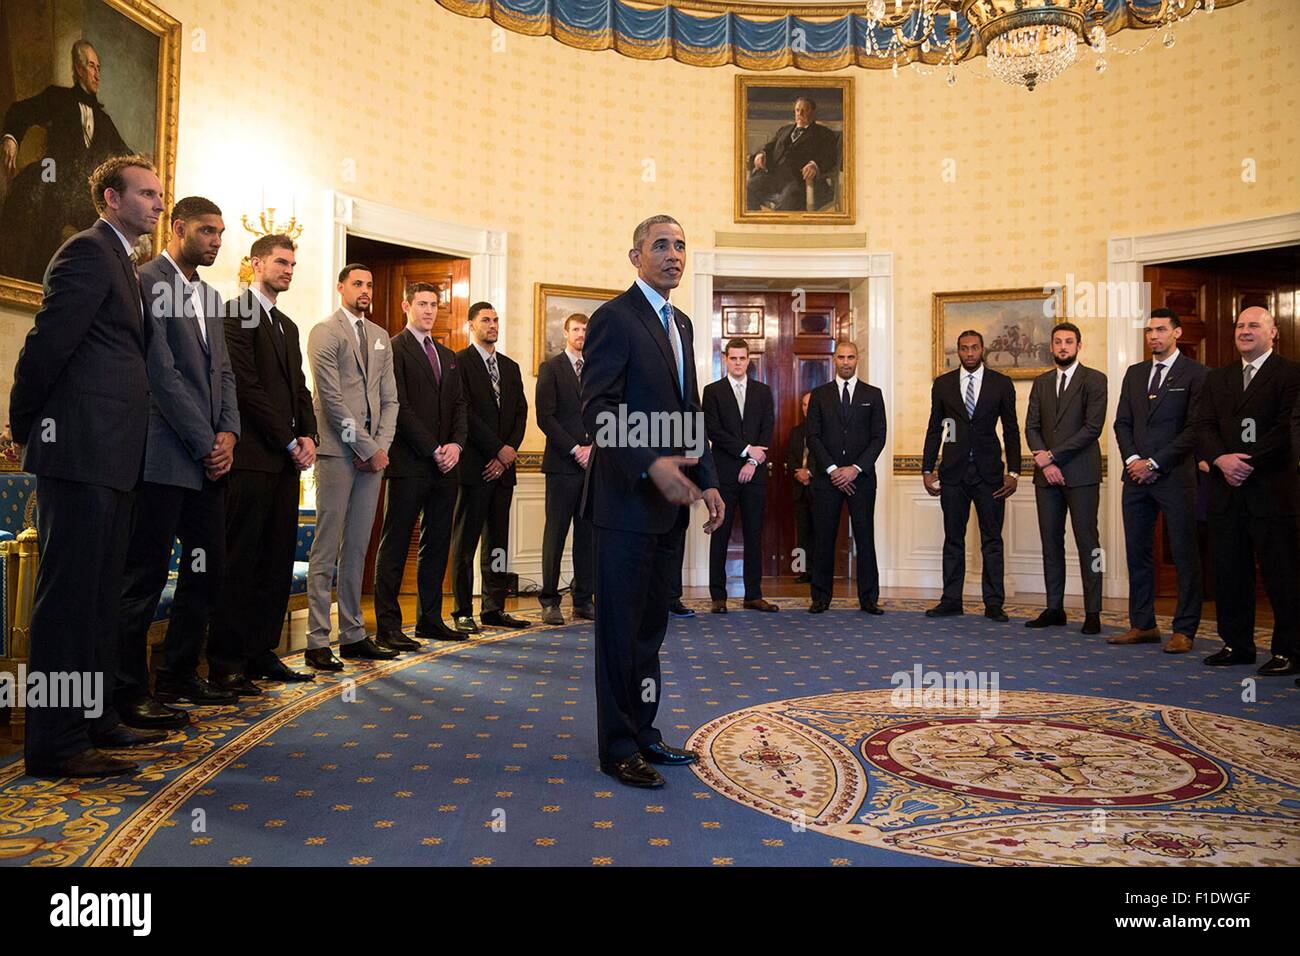 U.S. President Barack Obama speaks with the 2014 NBA Champion San Antonio Spurs basketball team in the Blue Room prior to an event honoring the team January 12, 2015 in Washington, D.C. Stock Photo